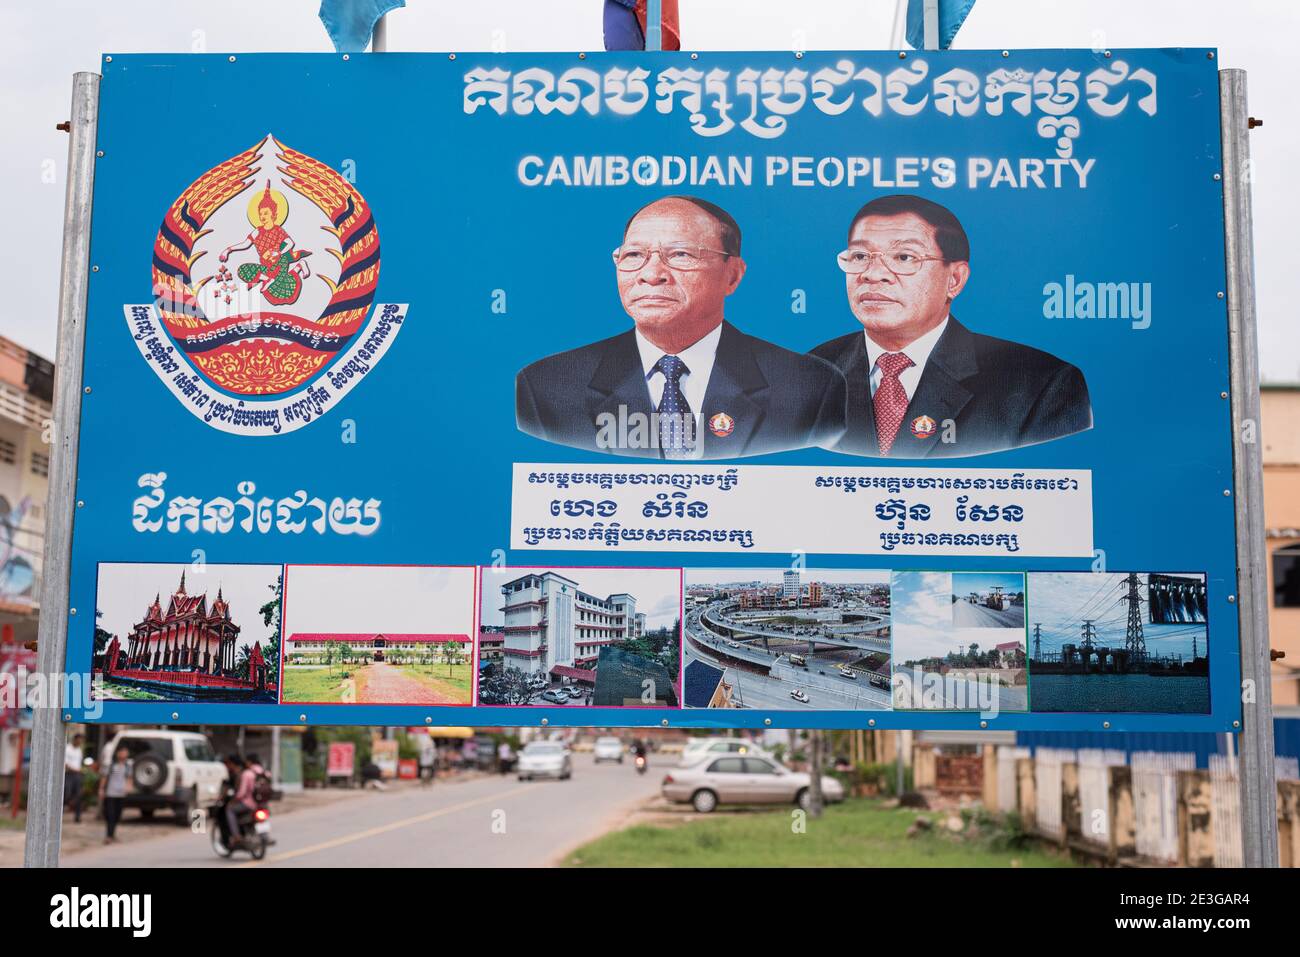 Cambodian People's Party billboard with political leaders (Heng Samrin on left and Hun Sen) depicted on it on December 13, 2016 in Kampot, Cambodia. Stock Photo